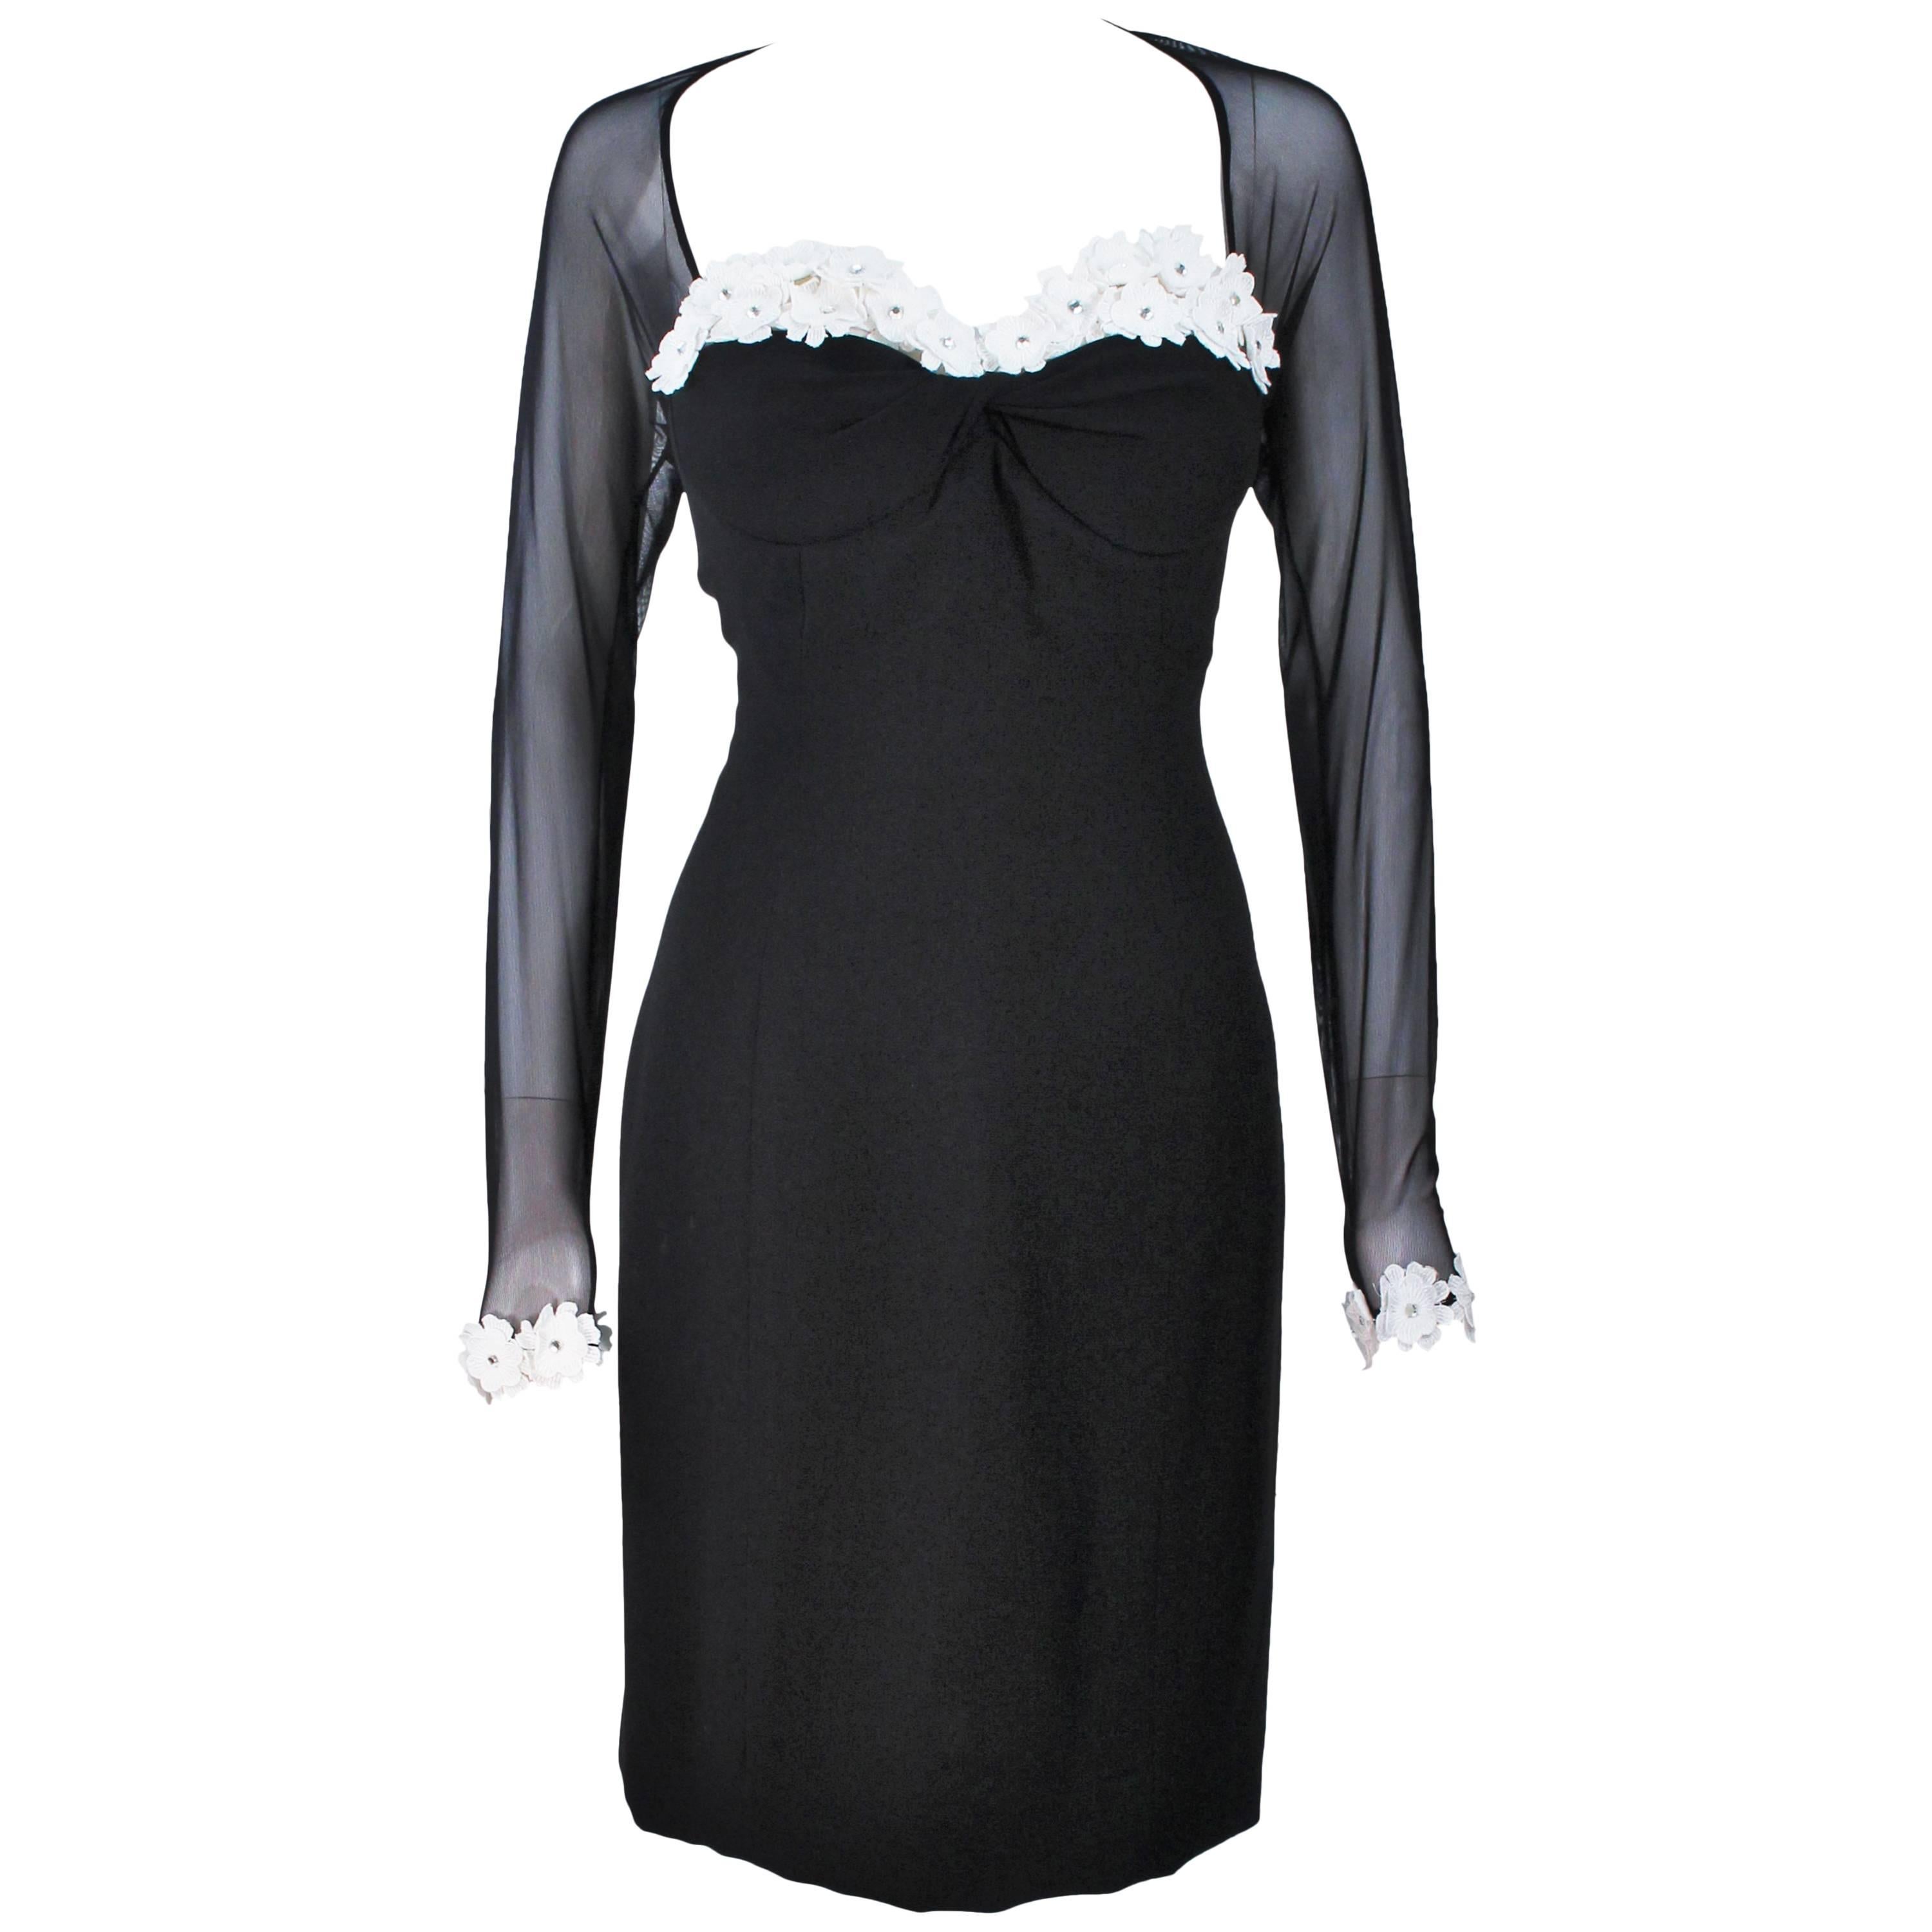 TRAVILLA Stretch Daisy Applique Cocktail Dress with Sheer Size 6-8 For Sale